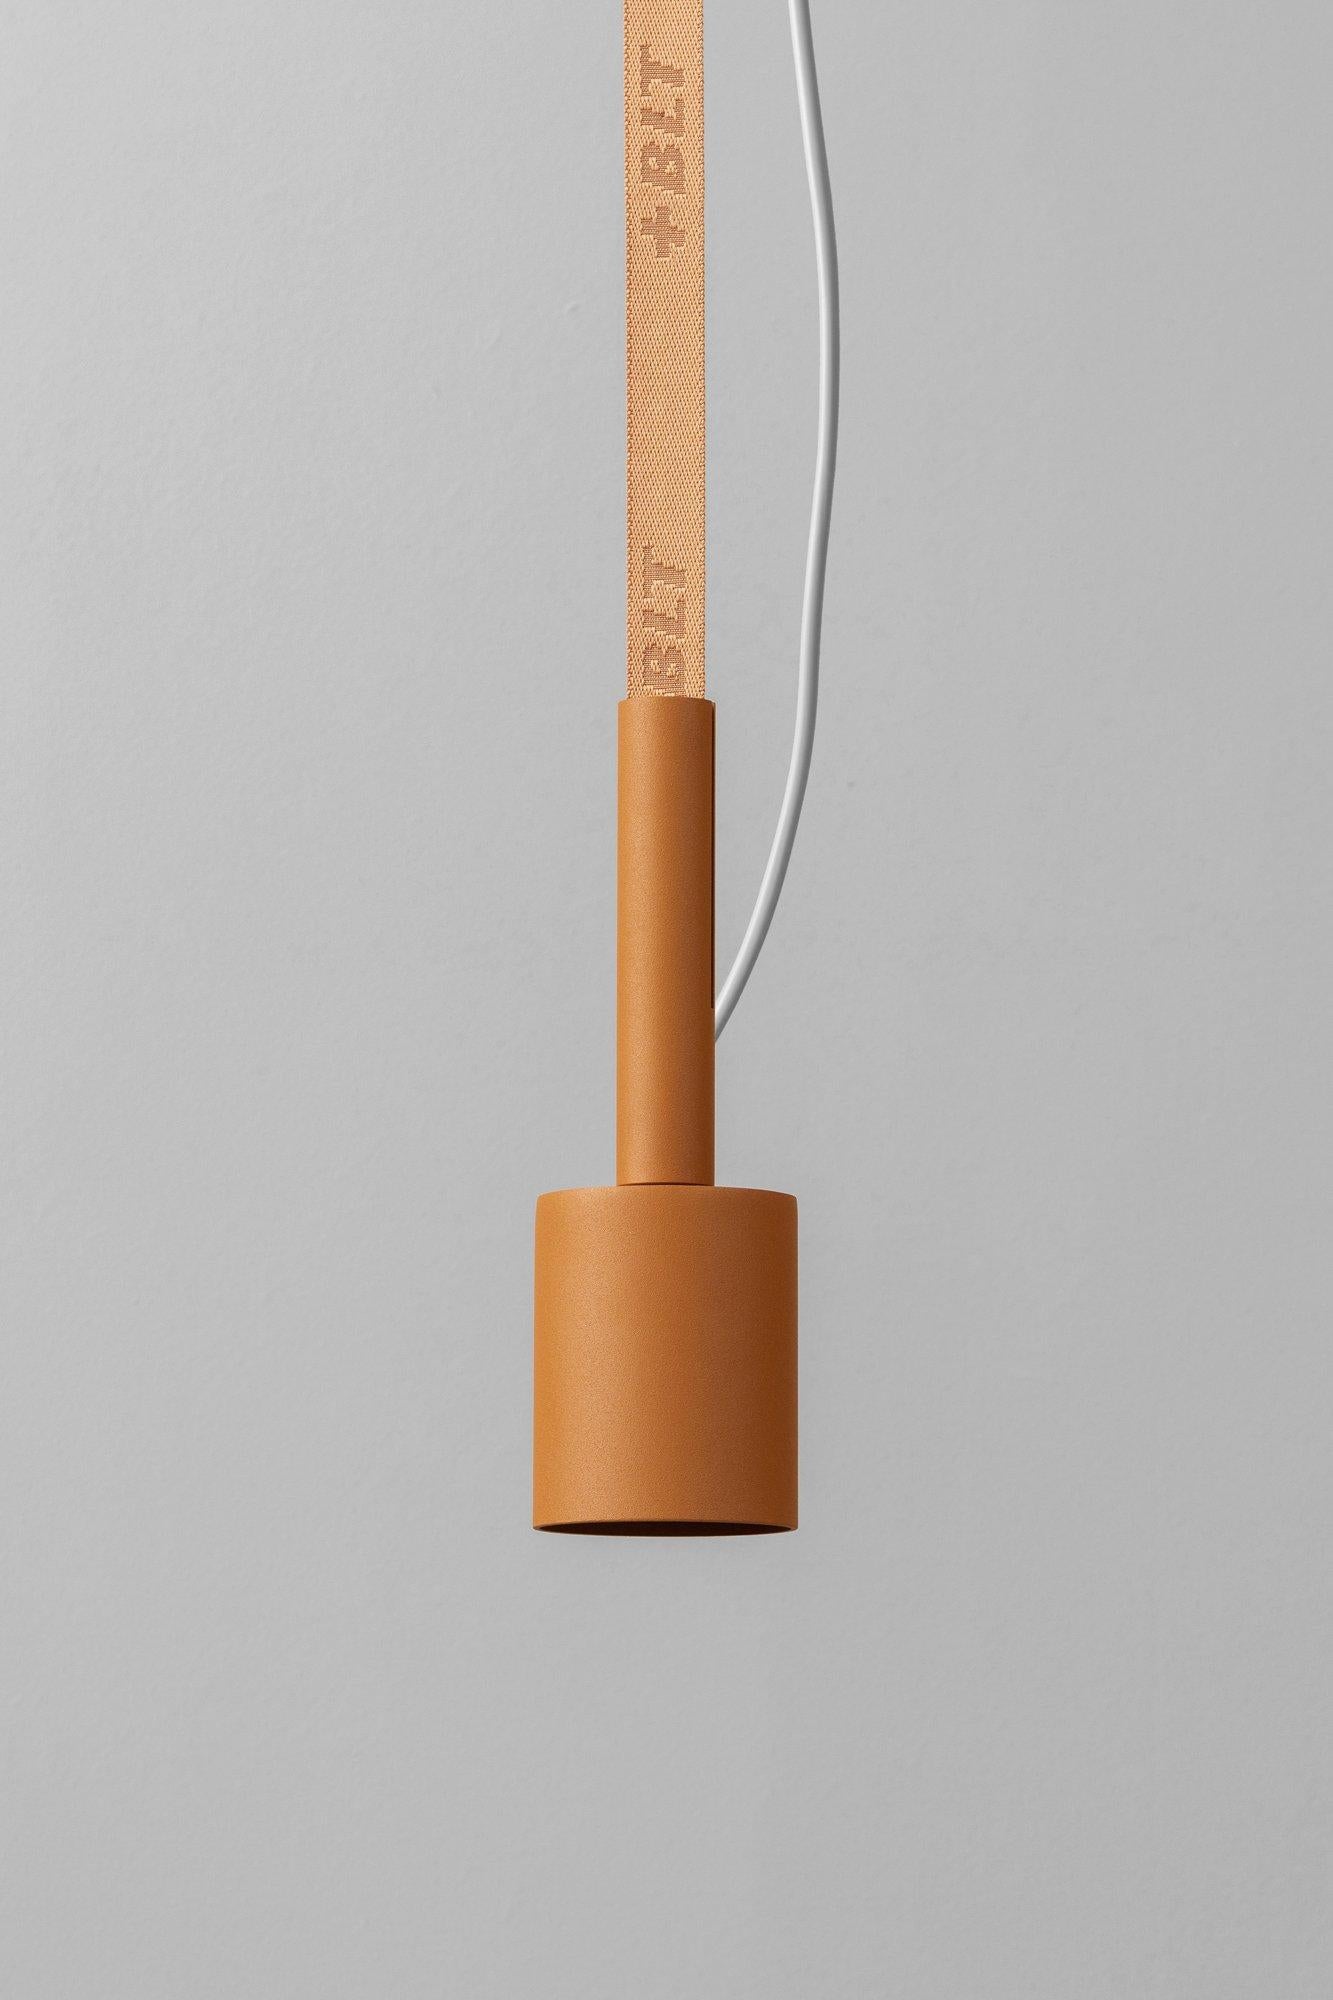 BLT_5 Almond Pendant Lamp by +kouple
Dimensions: Ø 8 x H 25,2 cm. 
Materials: Powder-coated steel and textile.

Available in different color options. The rod length is 250 cm. Please contact us.

All our lamps can be wired according to each country.